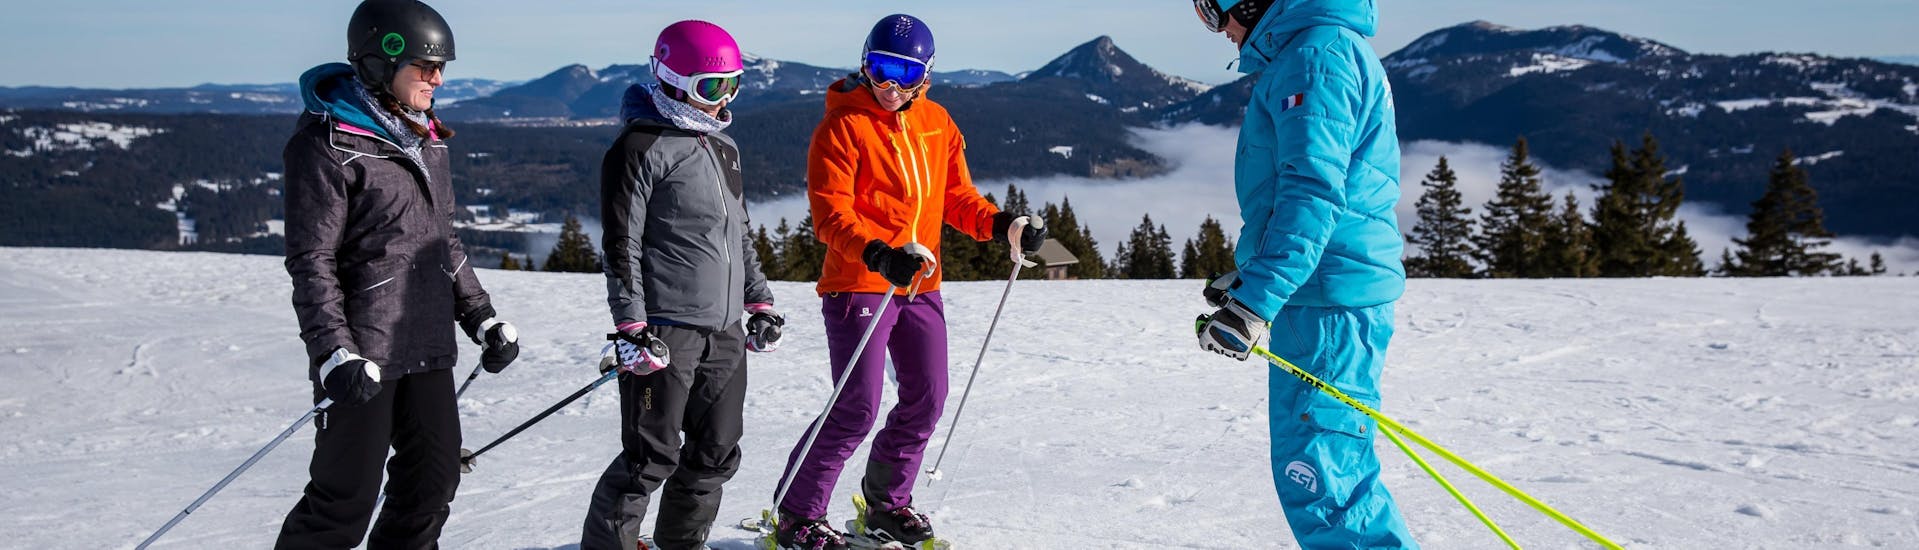 People are doing Teen & Adult Ski Lessons for Beginners - Holidays with ESI St Christophe Les Deux Alpes.